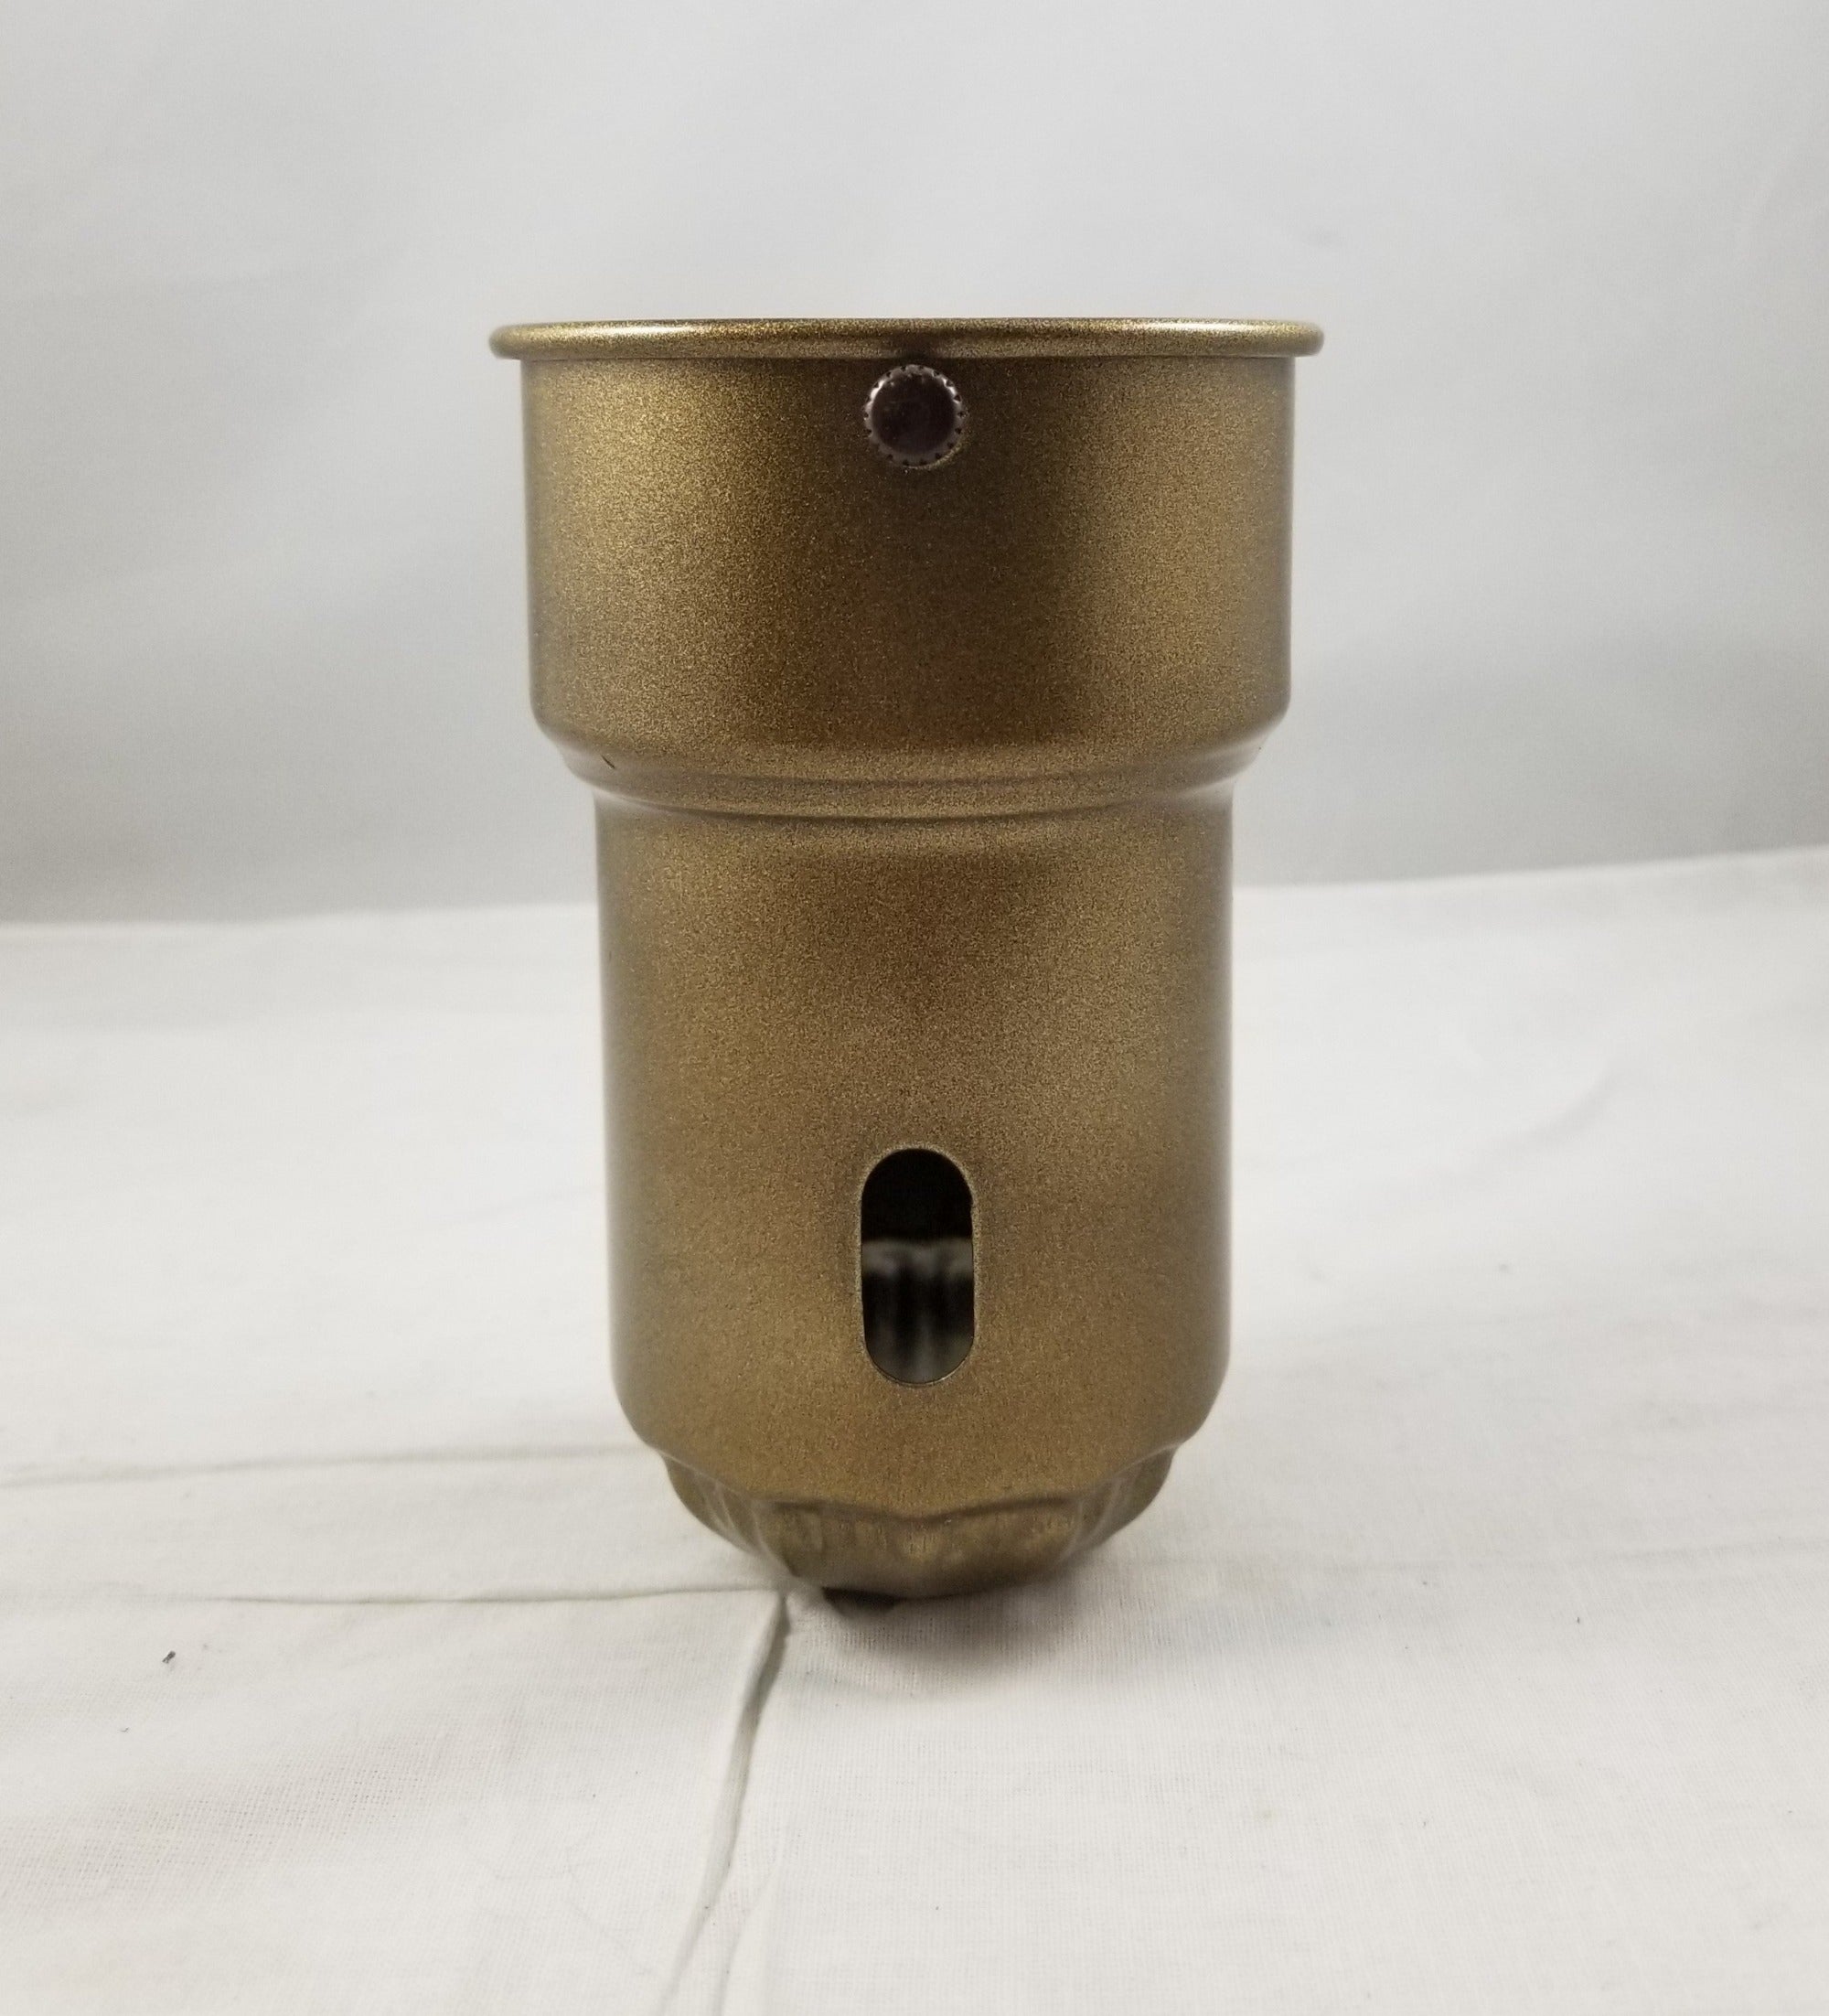 Bronze Finish Antique Socket Cover with Switch Side Hole